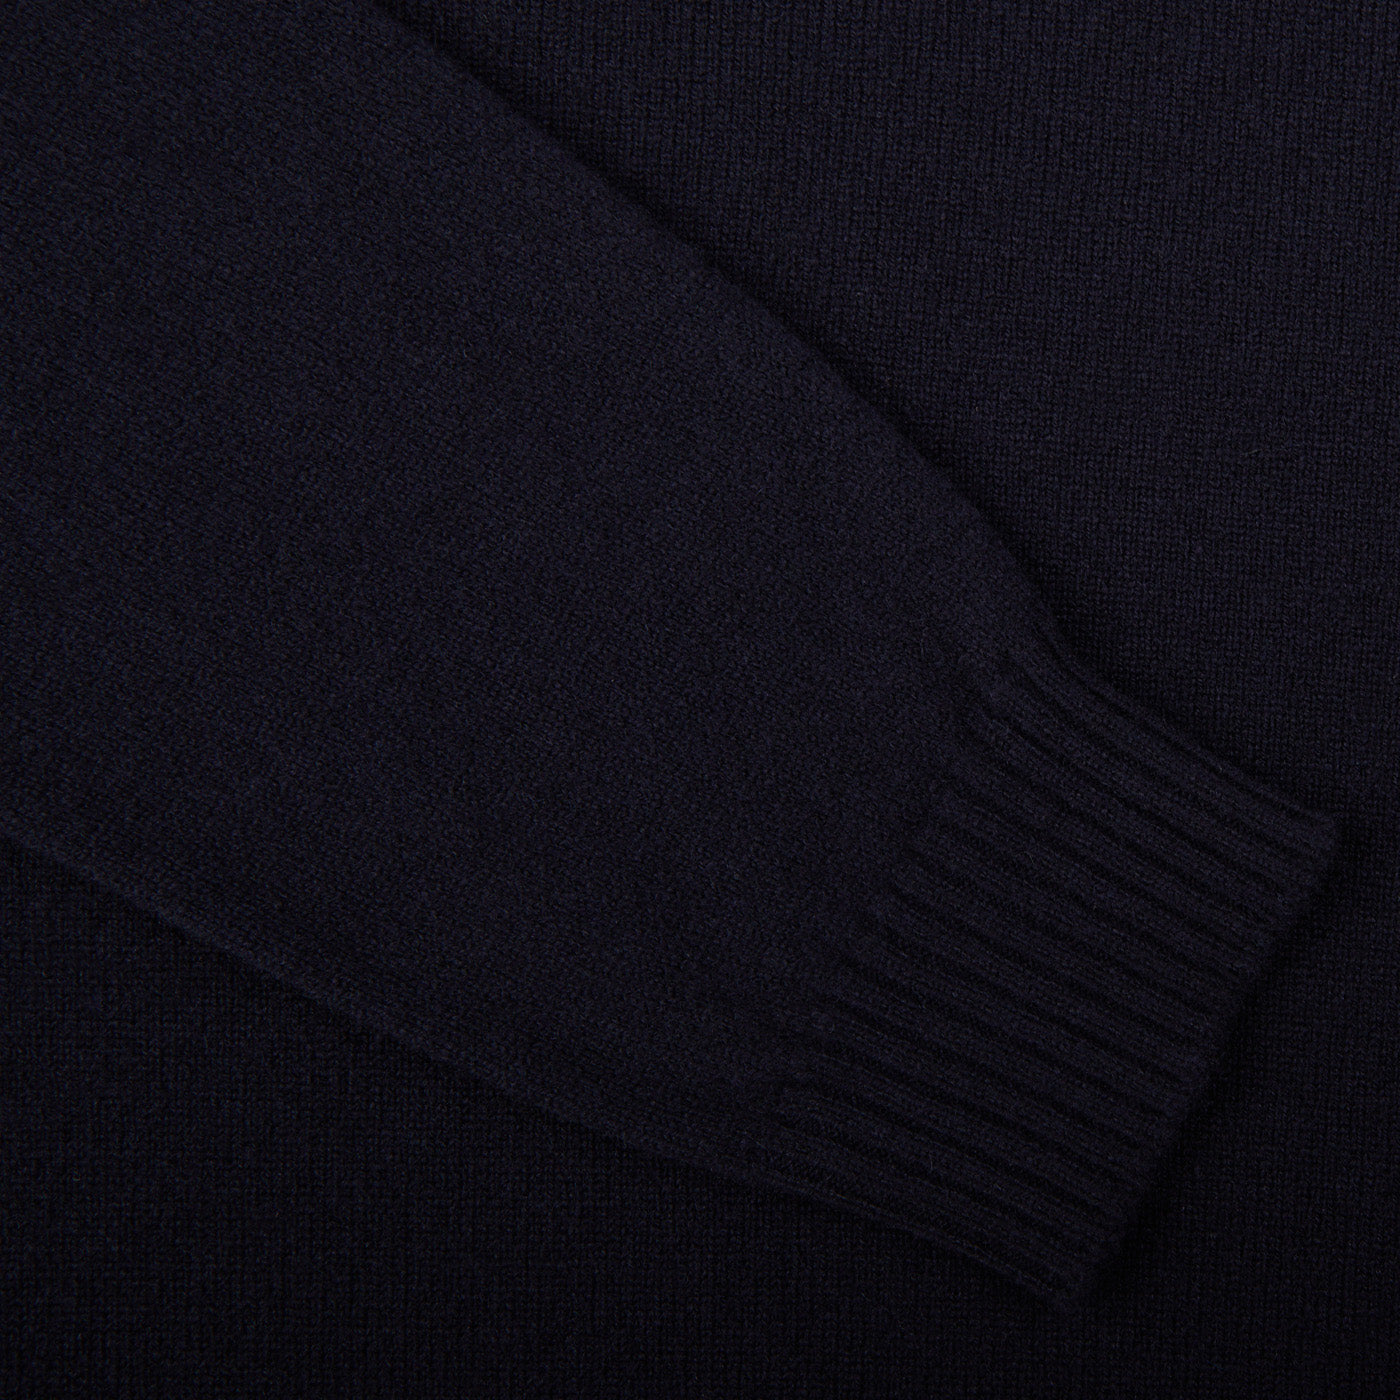 A close up of a William Lockie Navy Crewneck Lambswool Sweater.